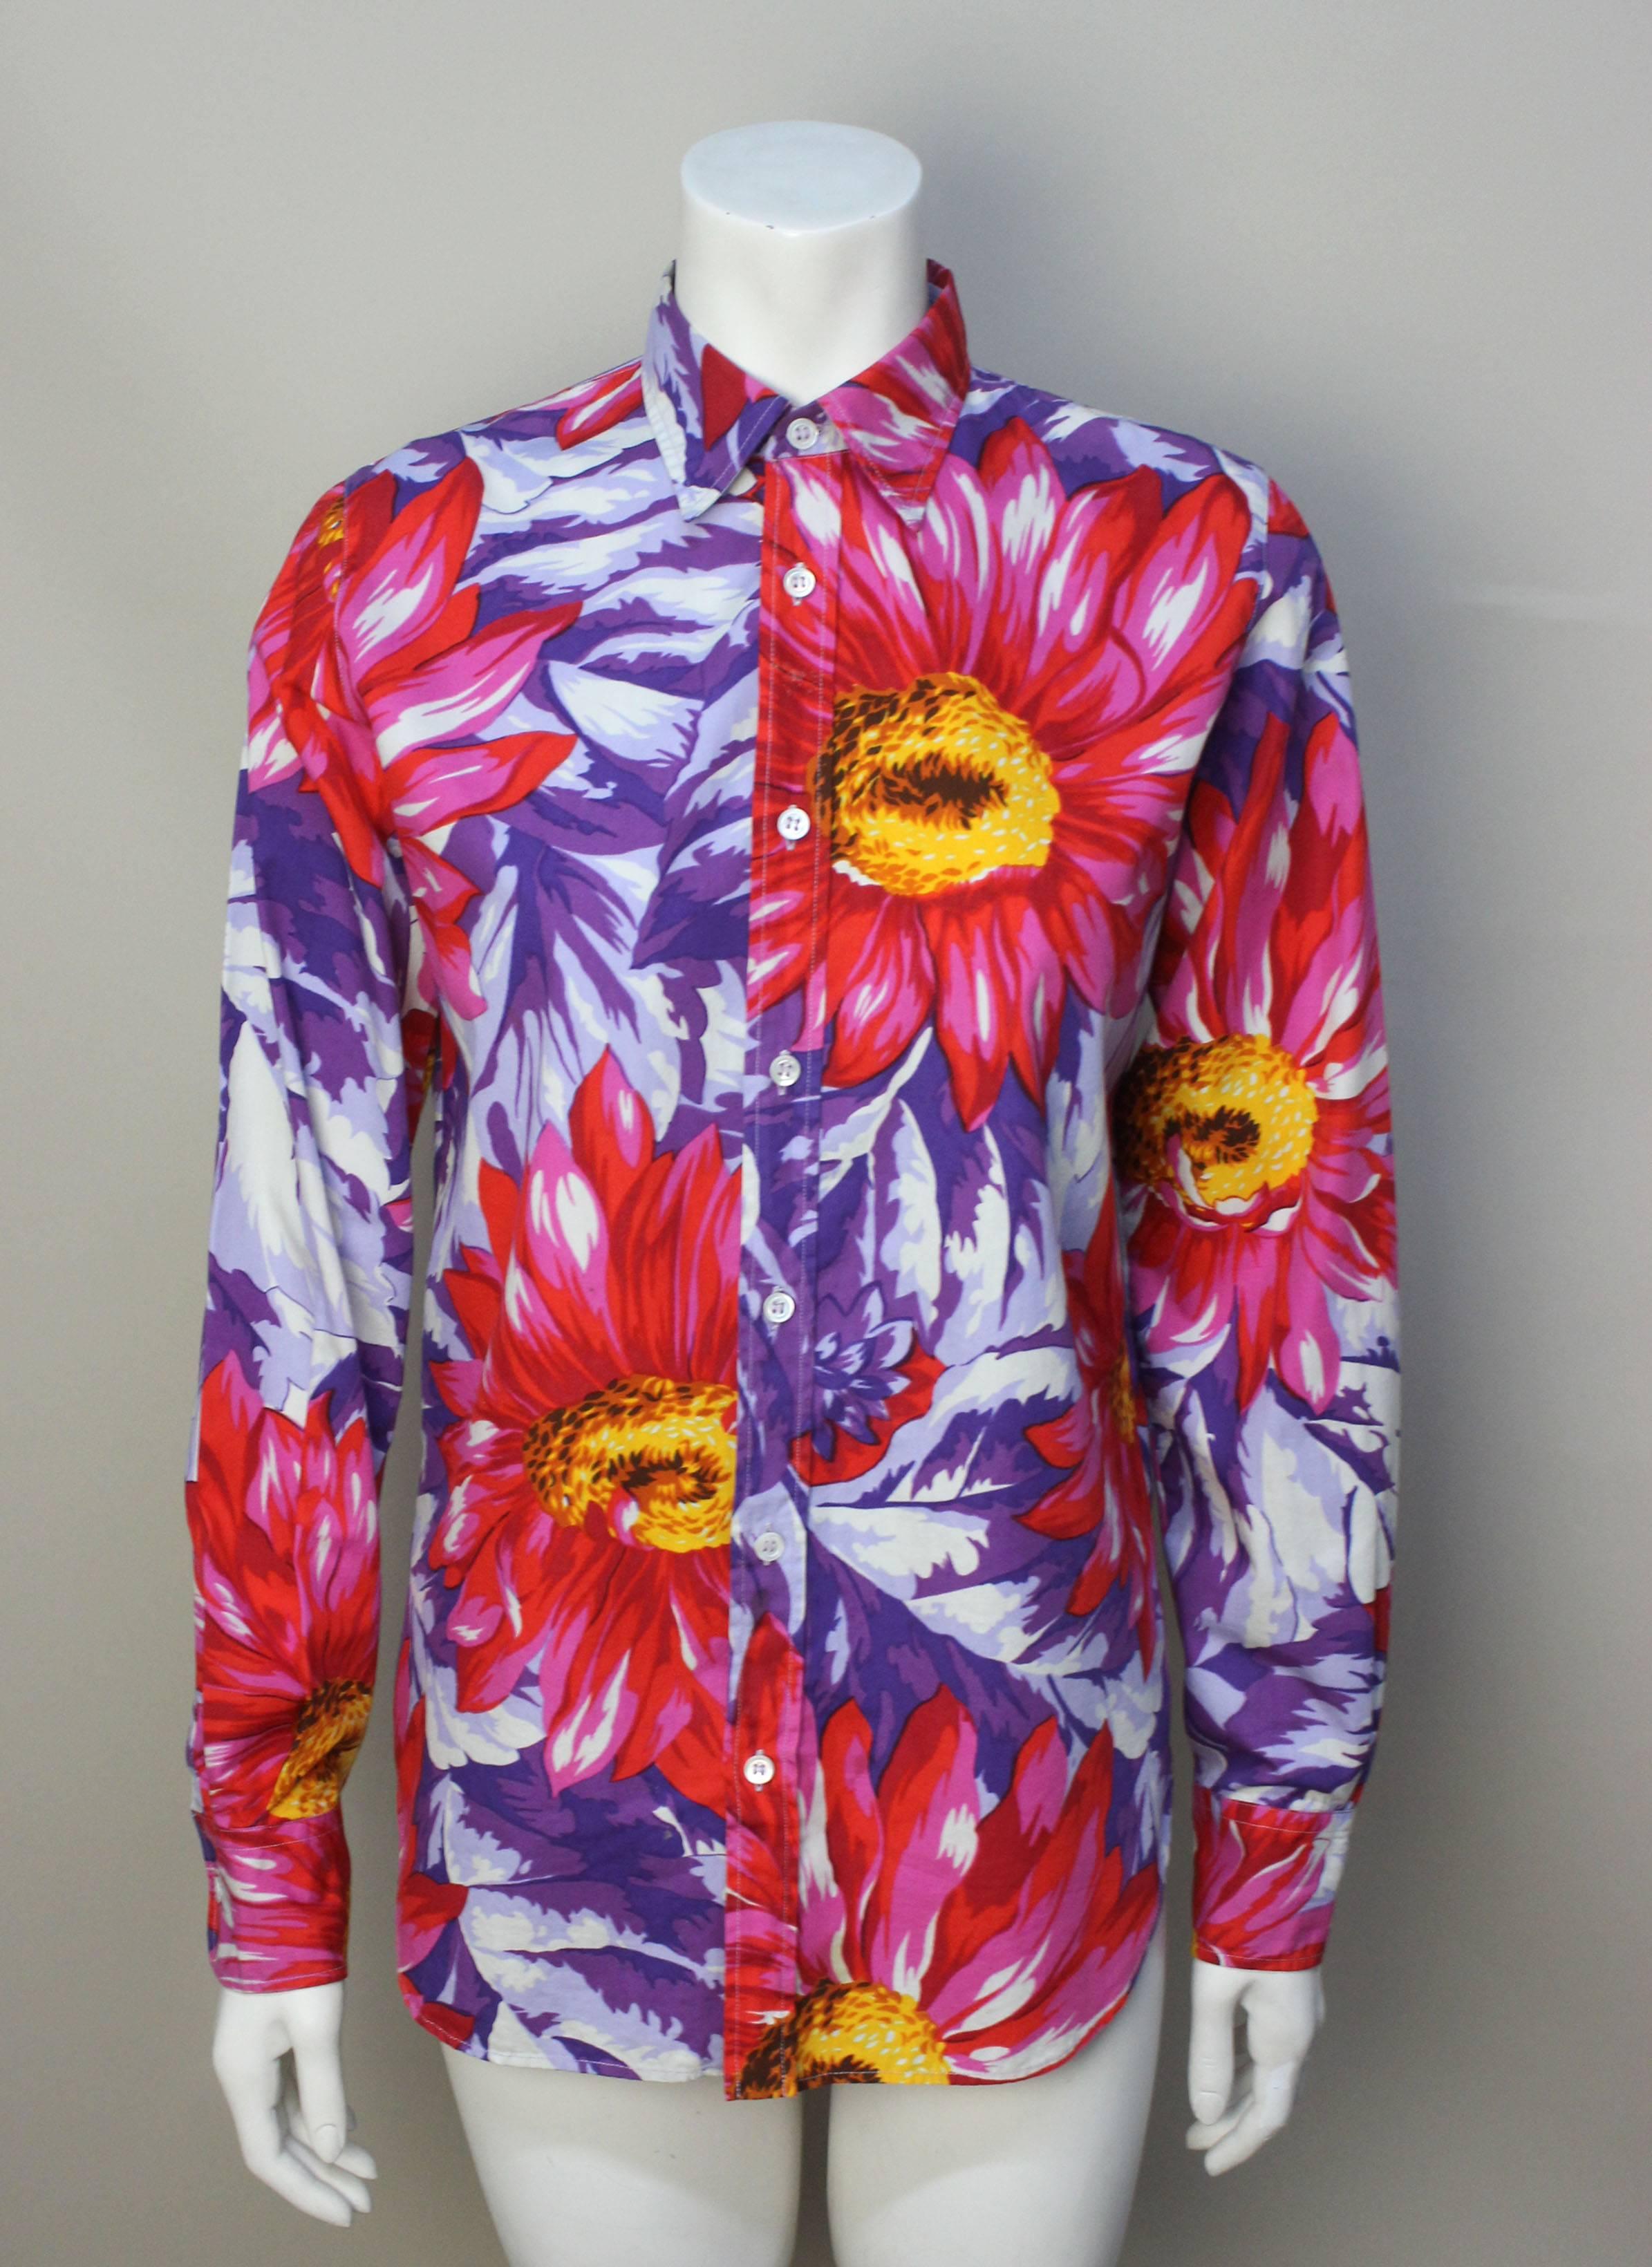 The pattern on this blouse is a bold and colorful floral. Large flowers are spashed across the garment in a painterly effect. The style is a classic button down, however the print makes it a standout piece. 